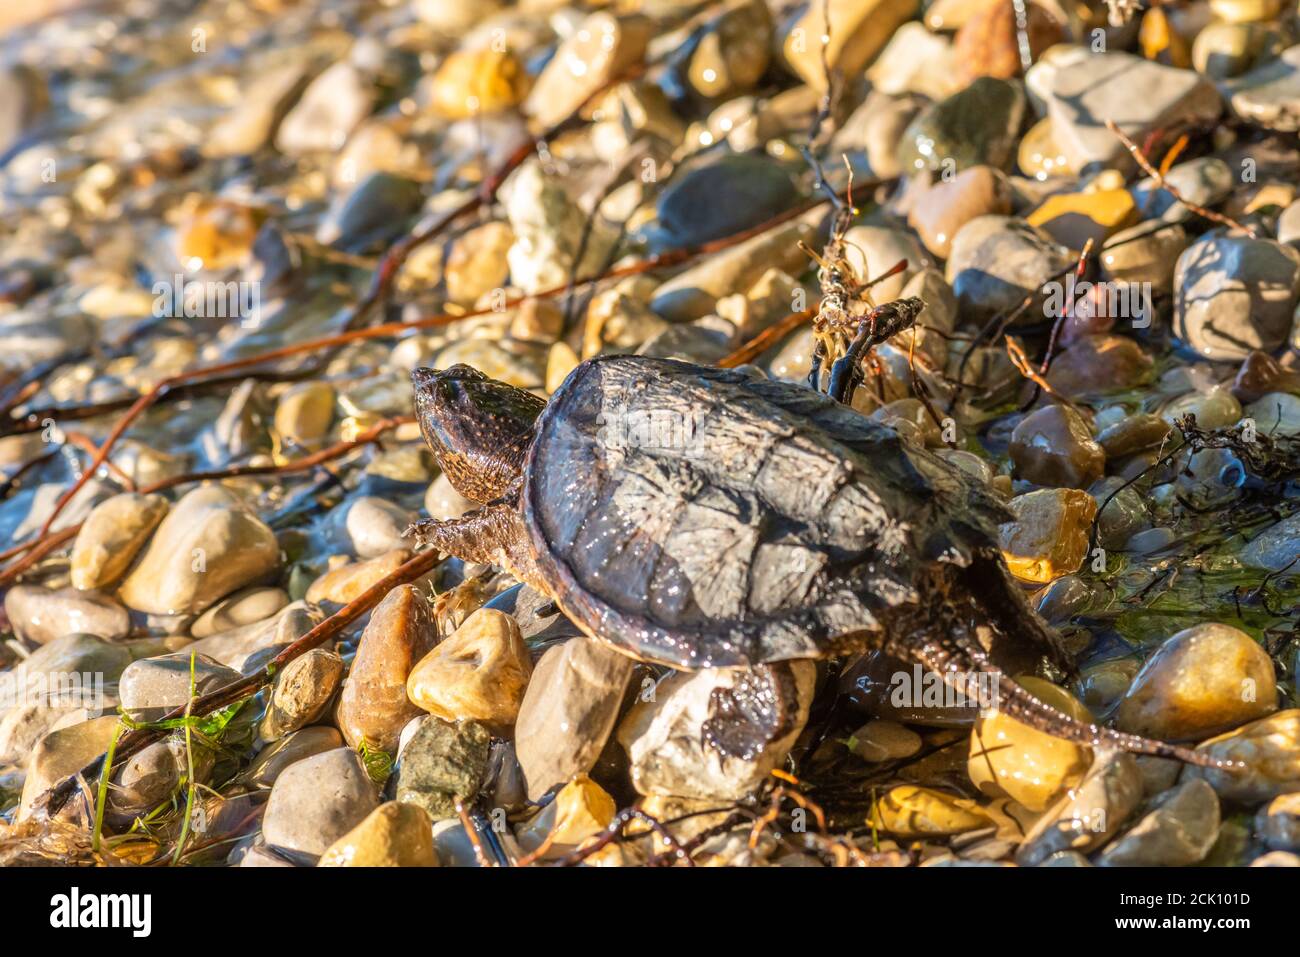 A young Common Snapping Turtle (Chelydra serpentina) makes its way across a rocky beach toward the water. Stock Photo